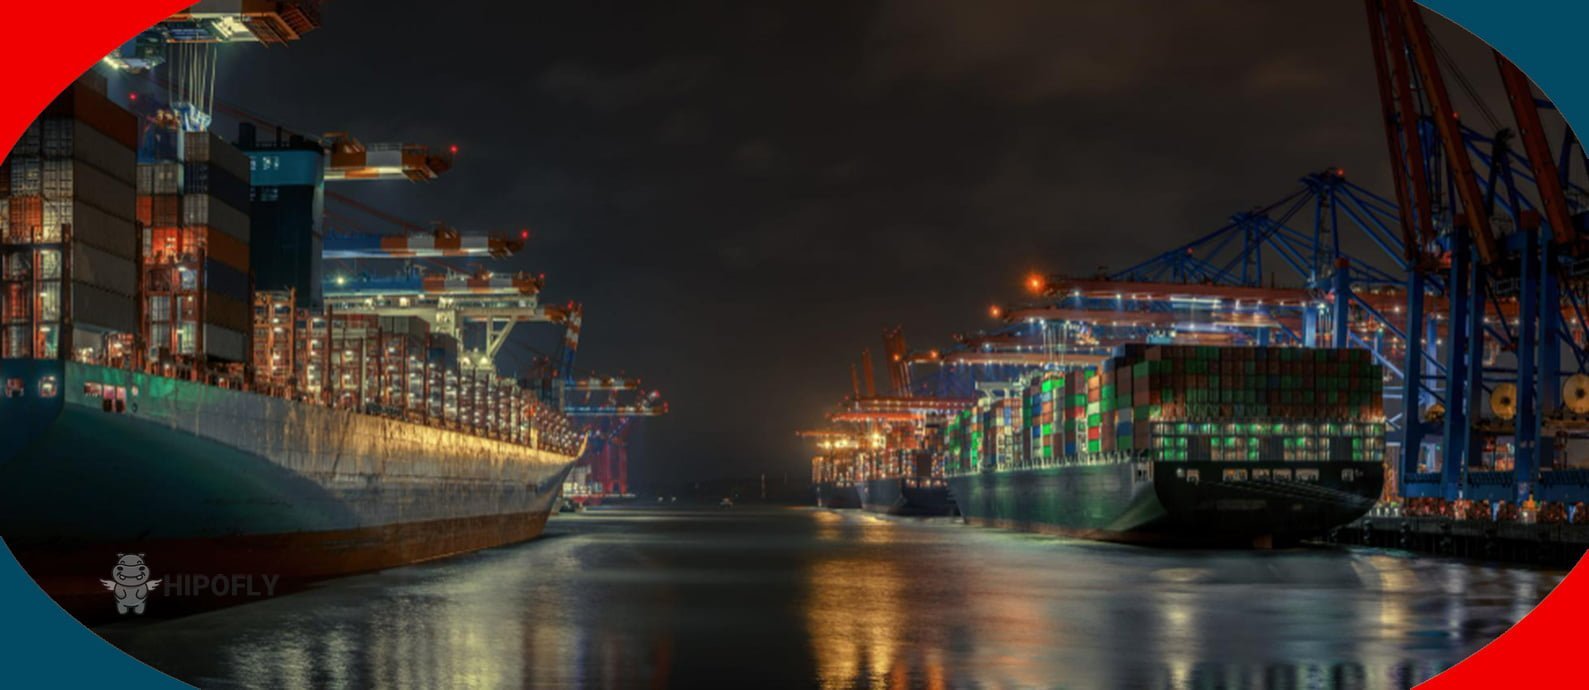 Implementing Sustainable Practices at Hong Kong Port